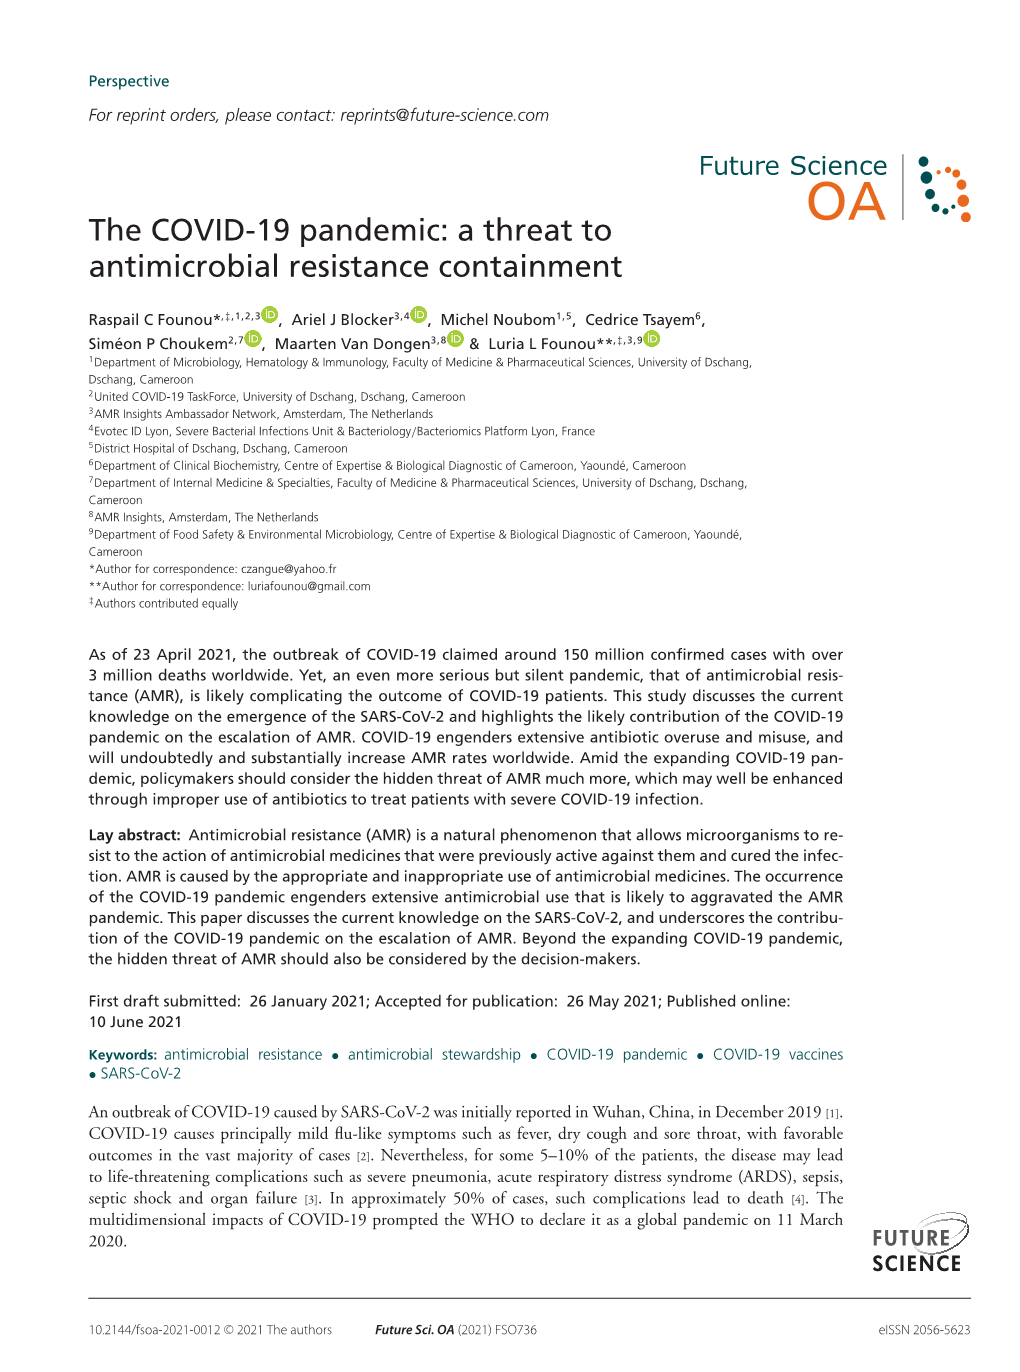 The COVID-19 Pandemic: a Threat to Antimicrobial Resistance Containment